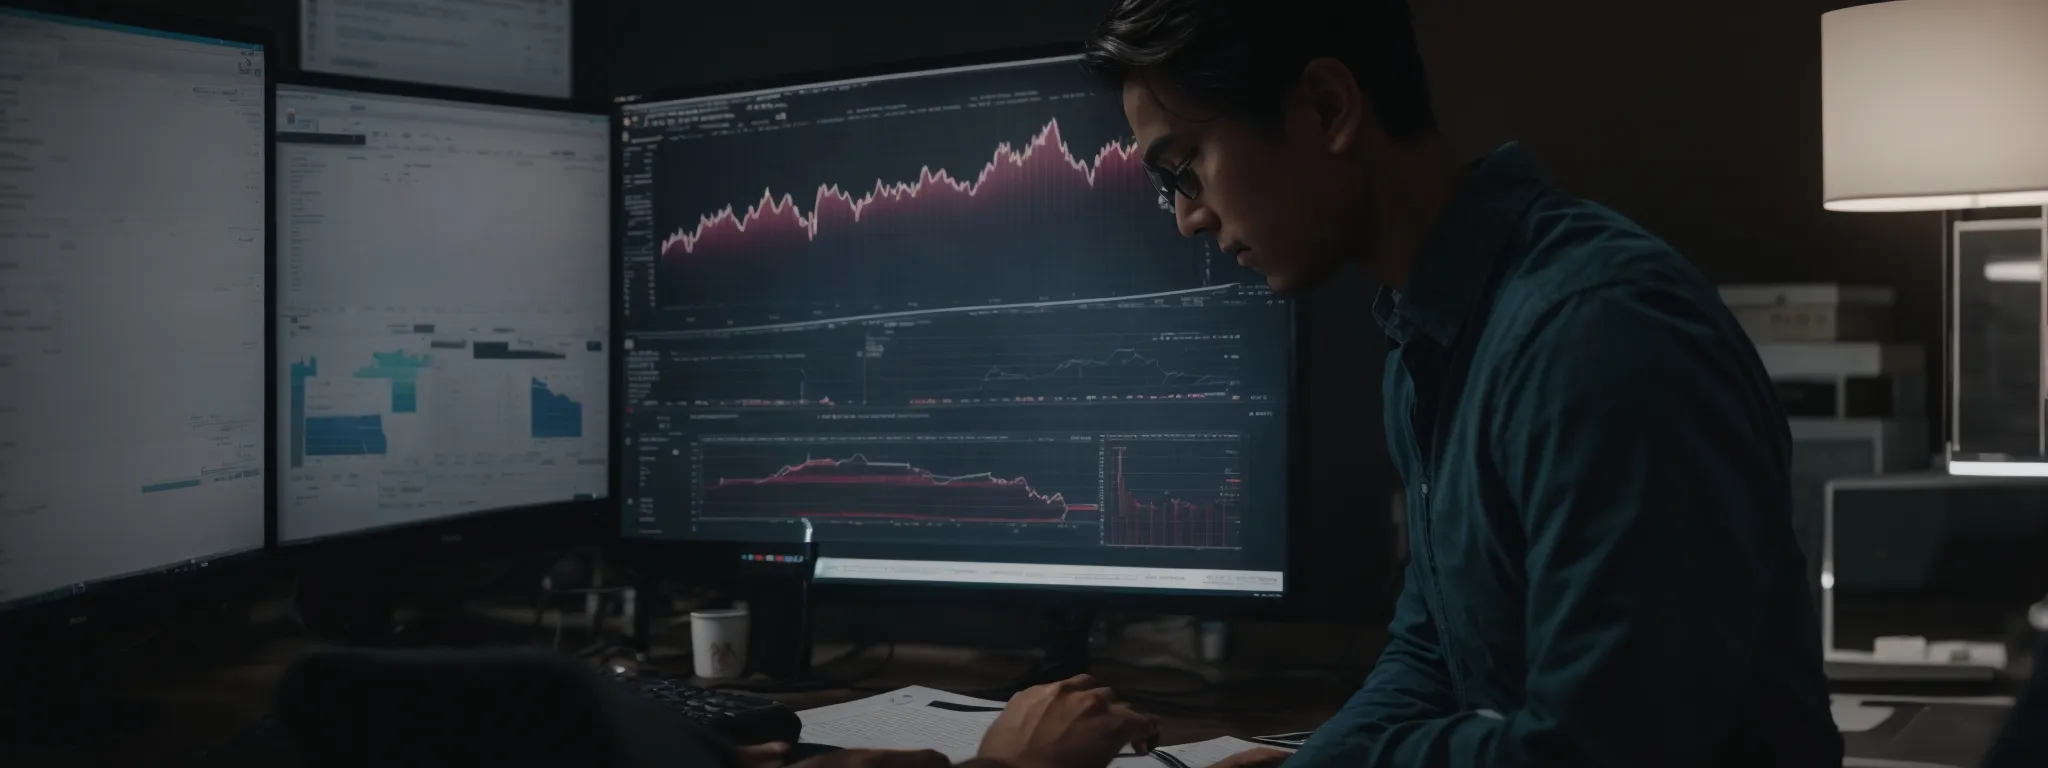 a focused individual intently studies a series of graphs and data analytics on a computer screen, strategizing an seo campaign.